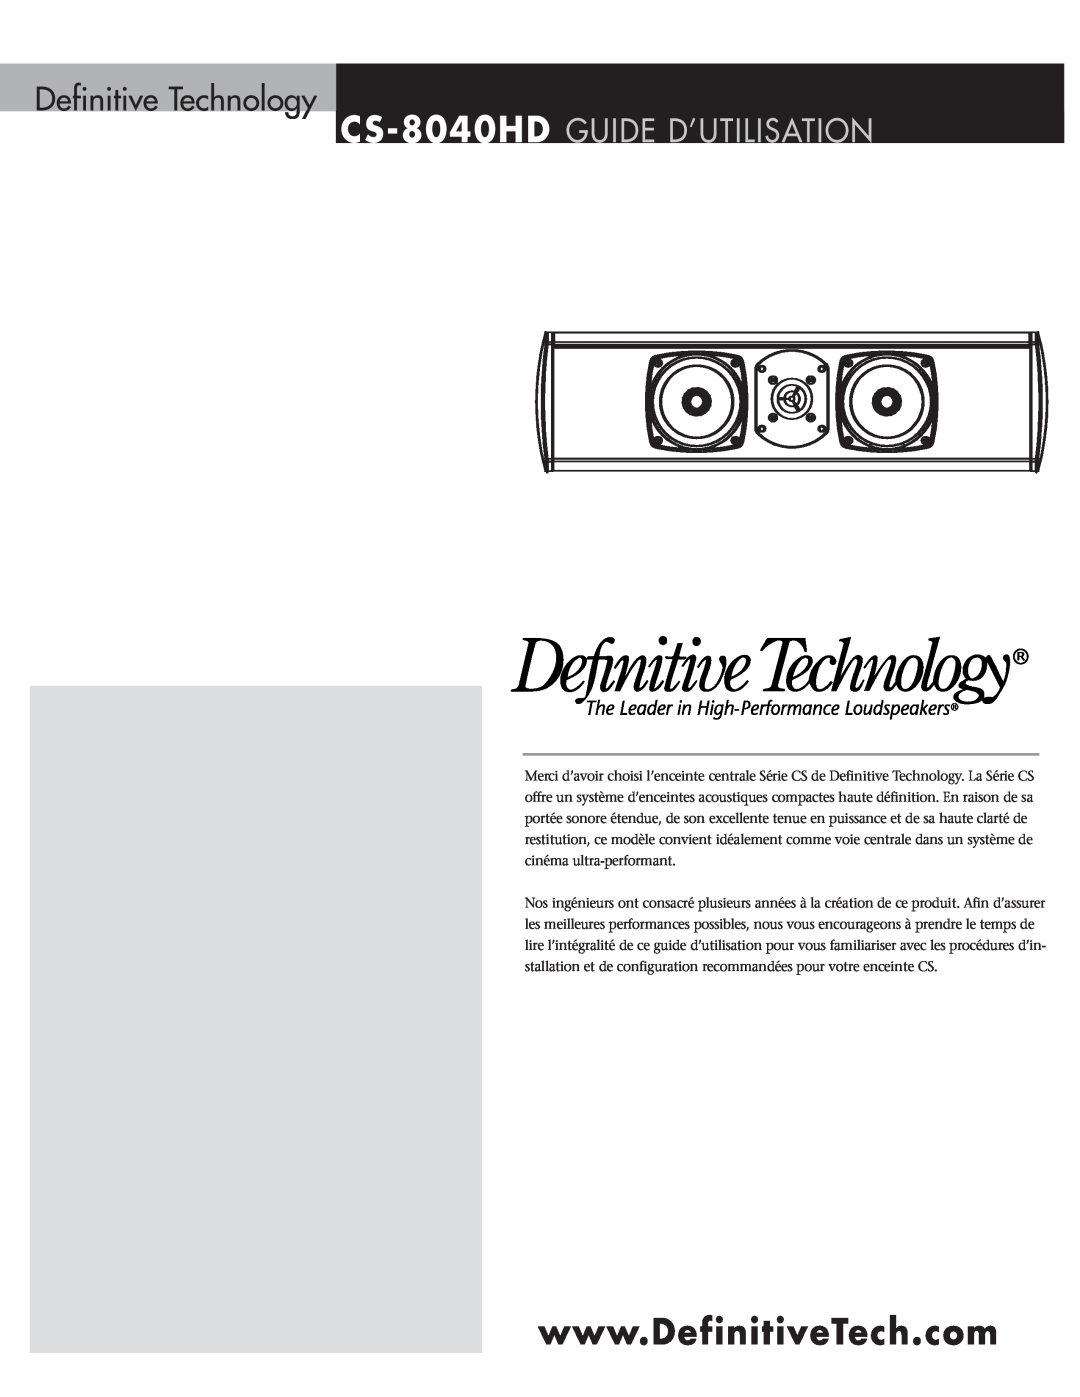 Definitive Technology owner manual CS-8040HD GUIDE D’UTILISATION, Definitive Technology 